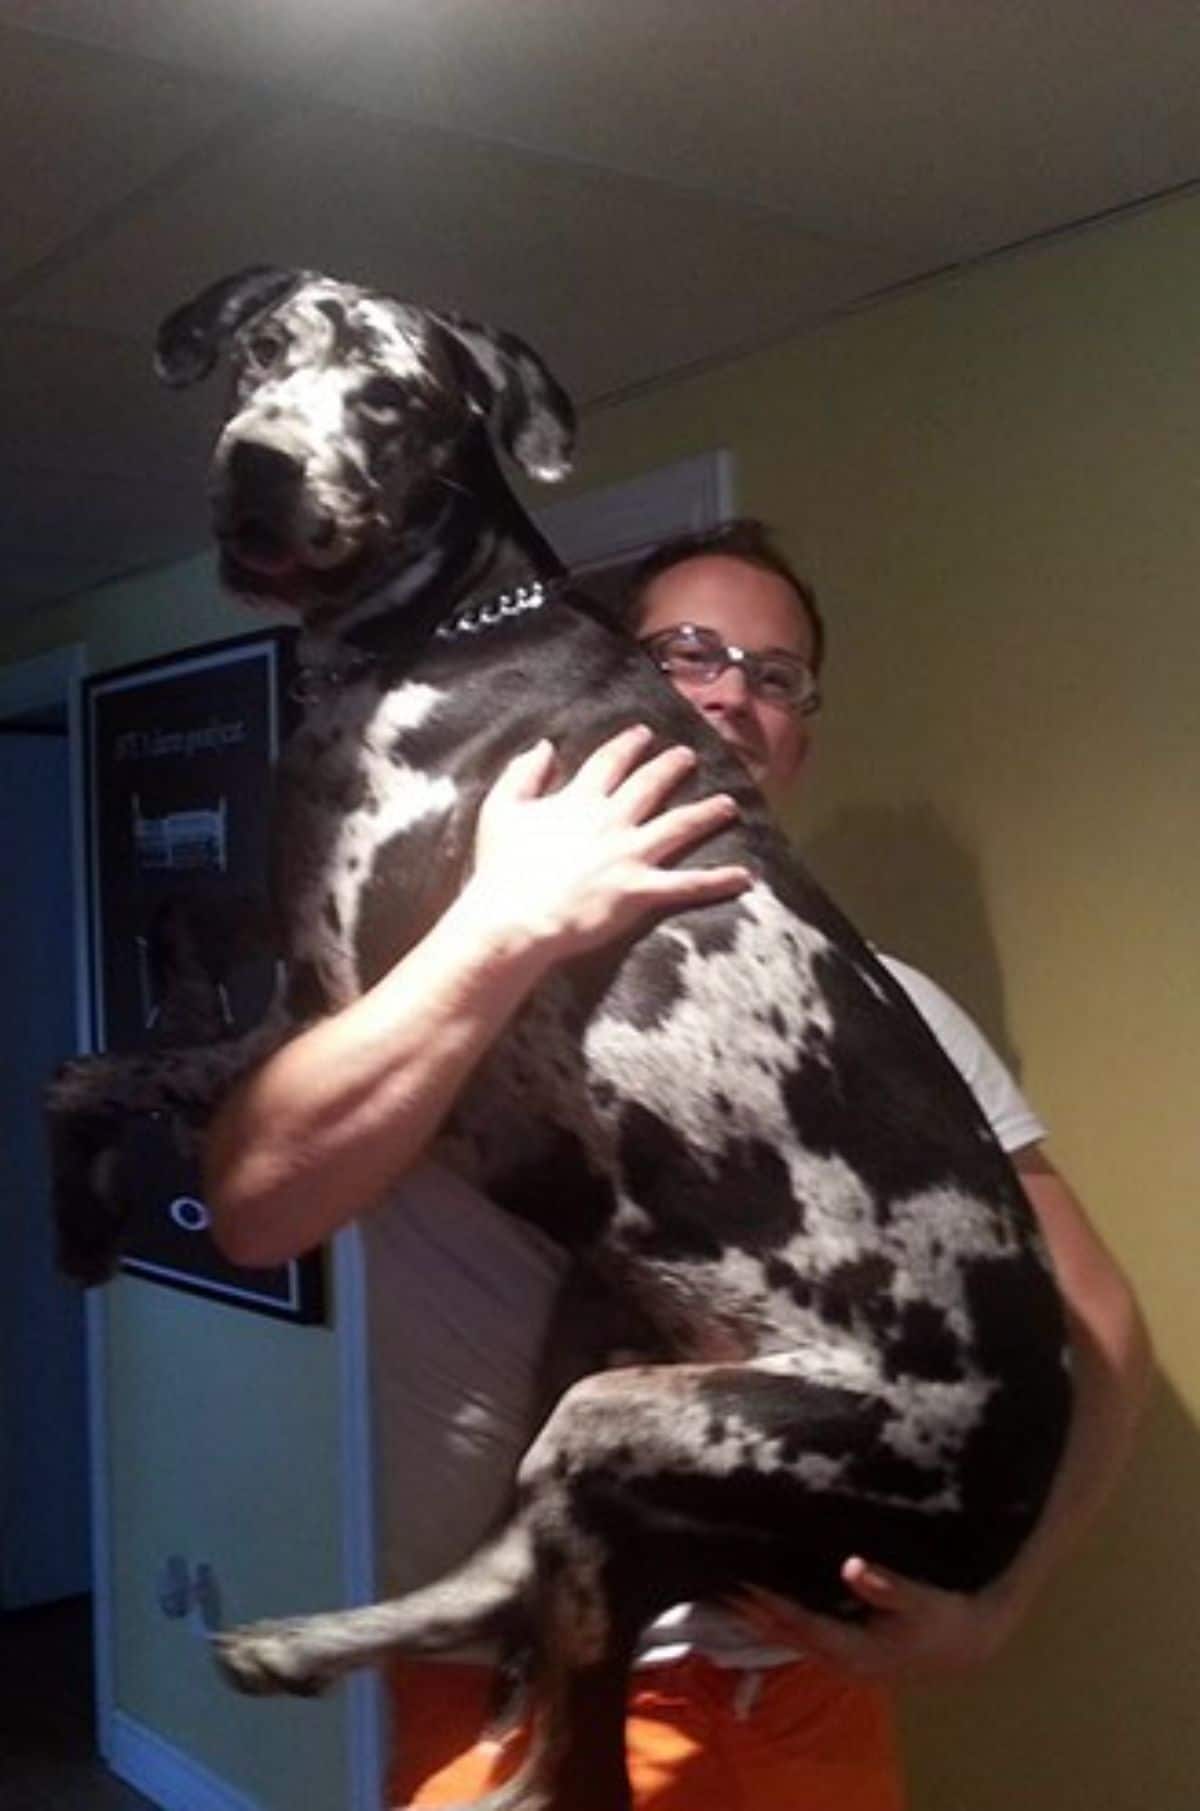 black and white great dane being held up by a man